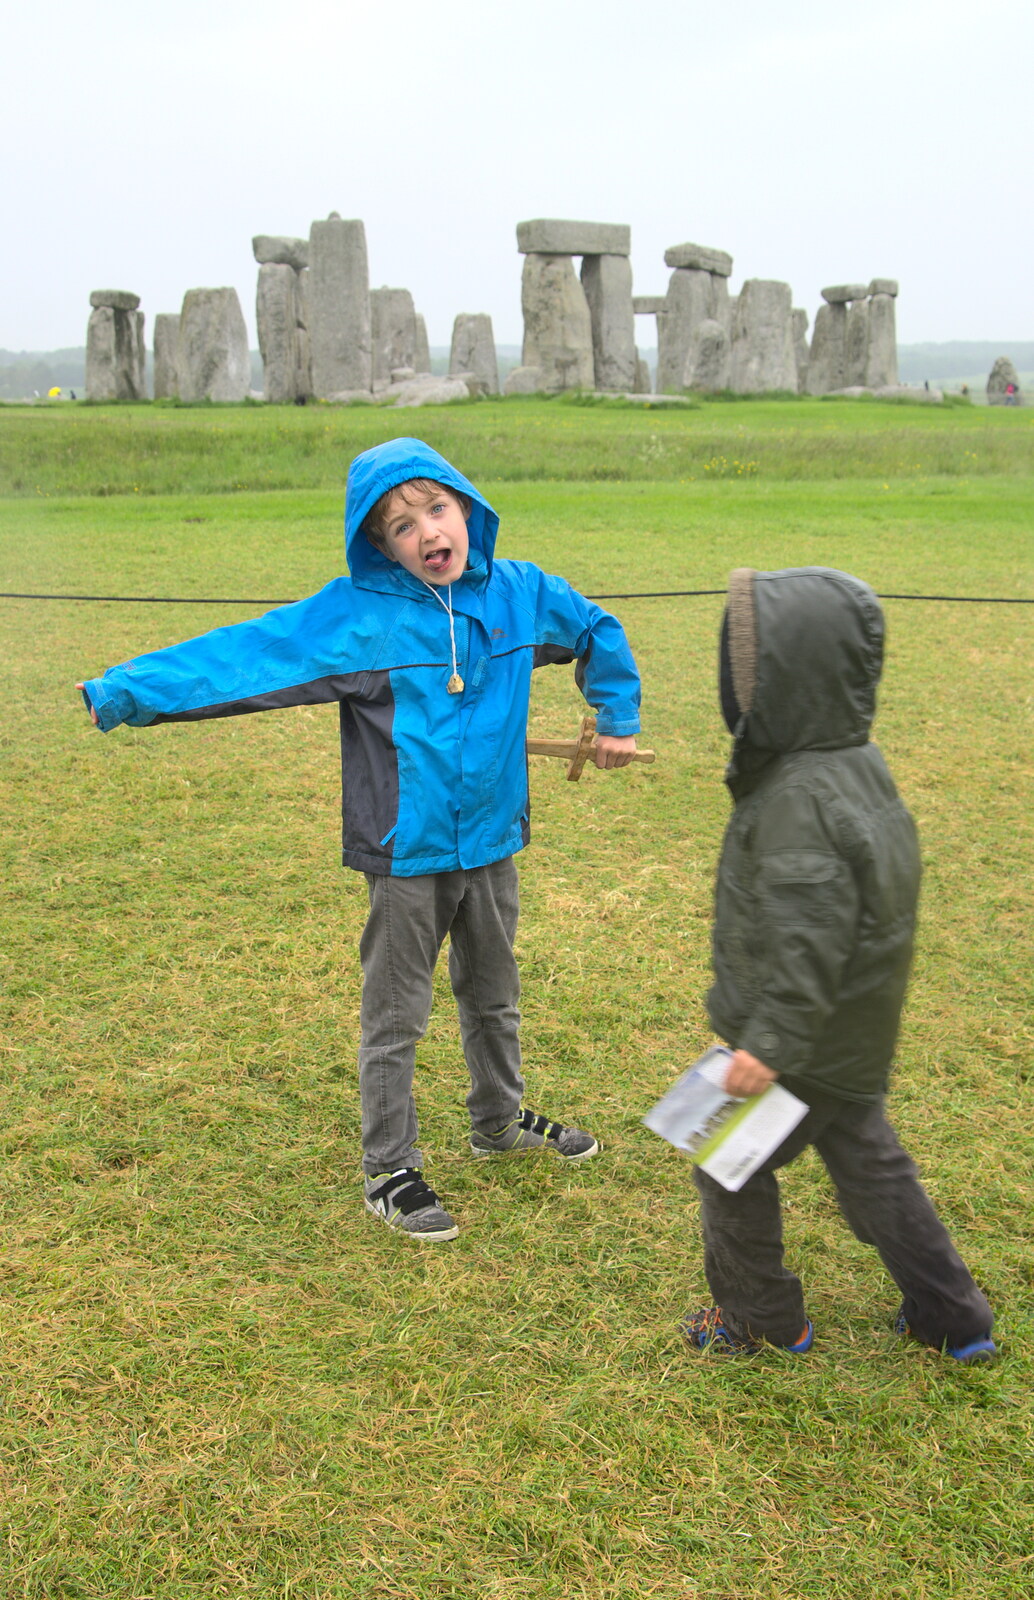 Fred pretends to stab himself from Spreyton to Stonehenge, Salisbury Plain, Wiltshire - 31st May 2016